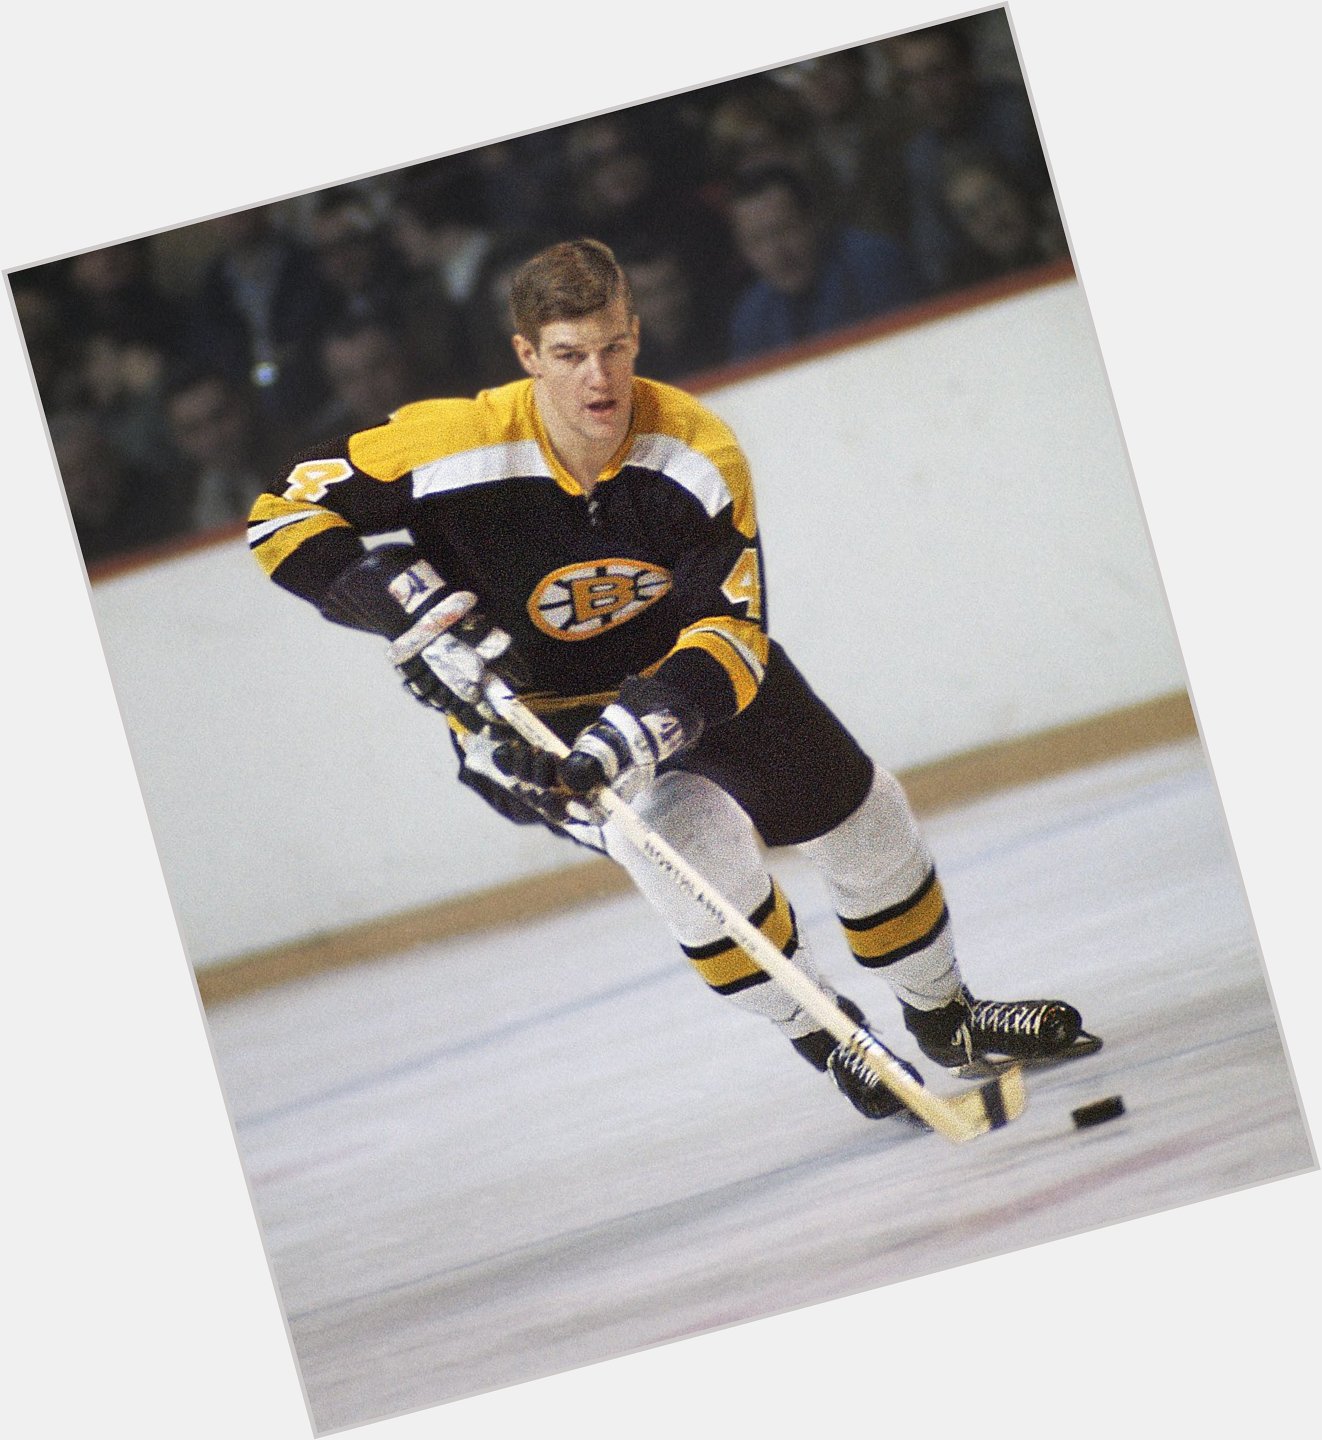 Happy Birthday to one of my all time favorites, Bobby Orr! 